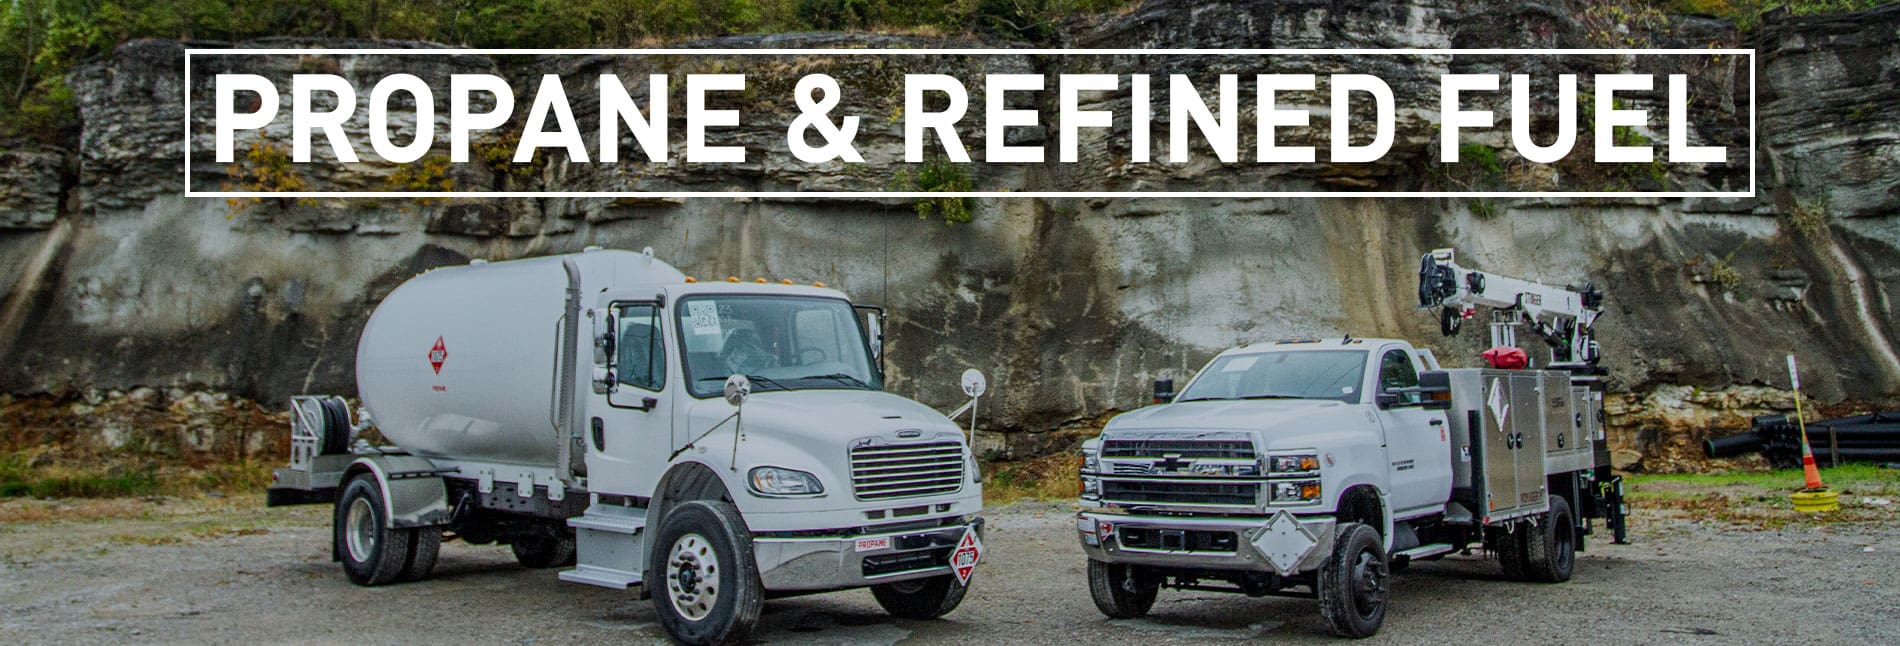 Propane and Refined Fueling Equipment